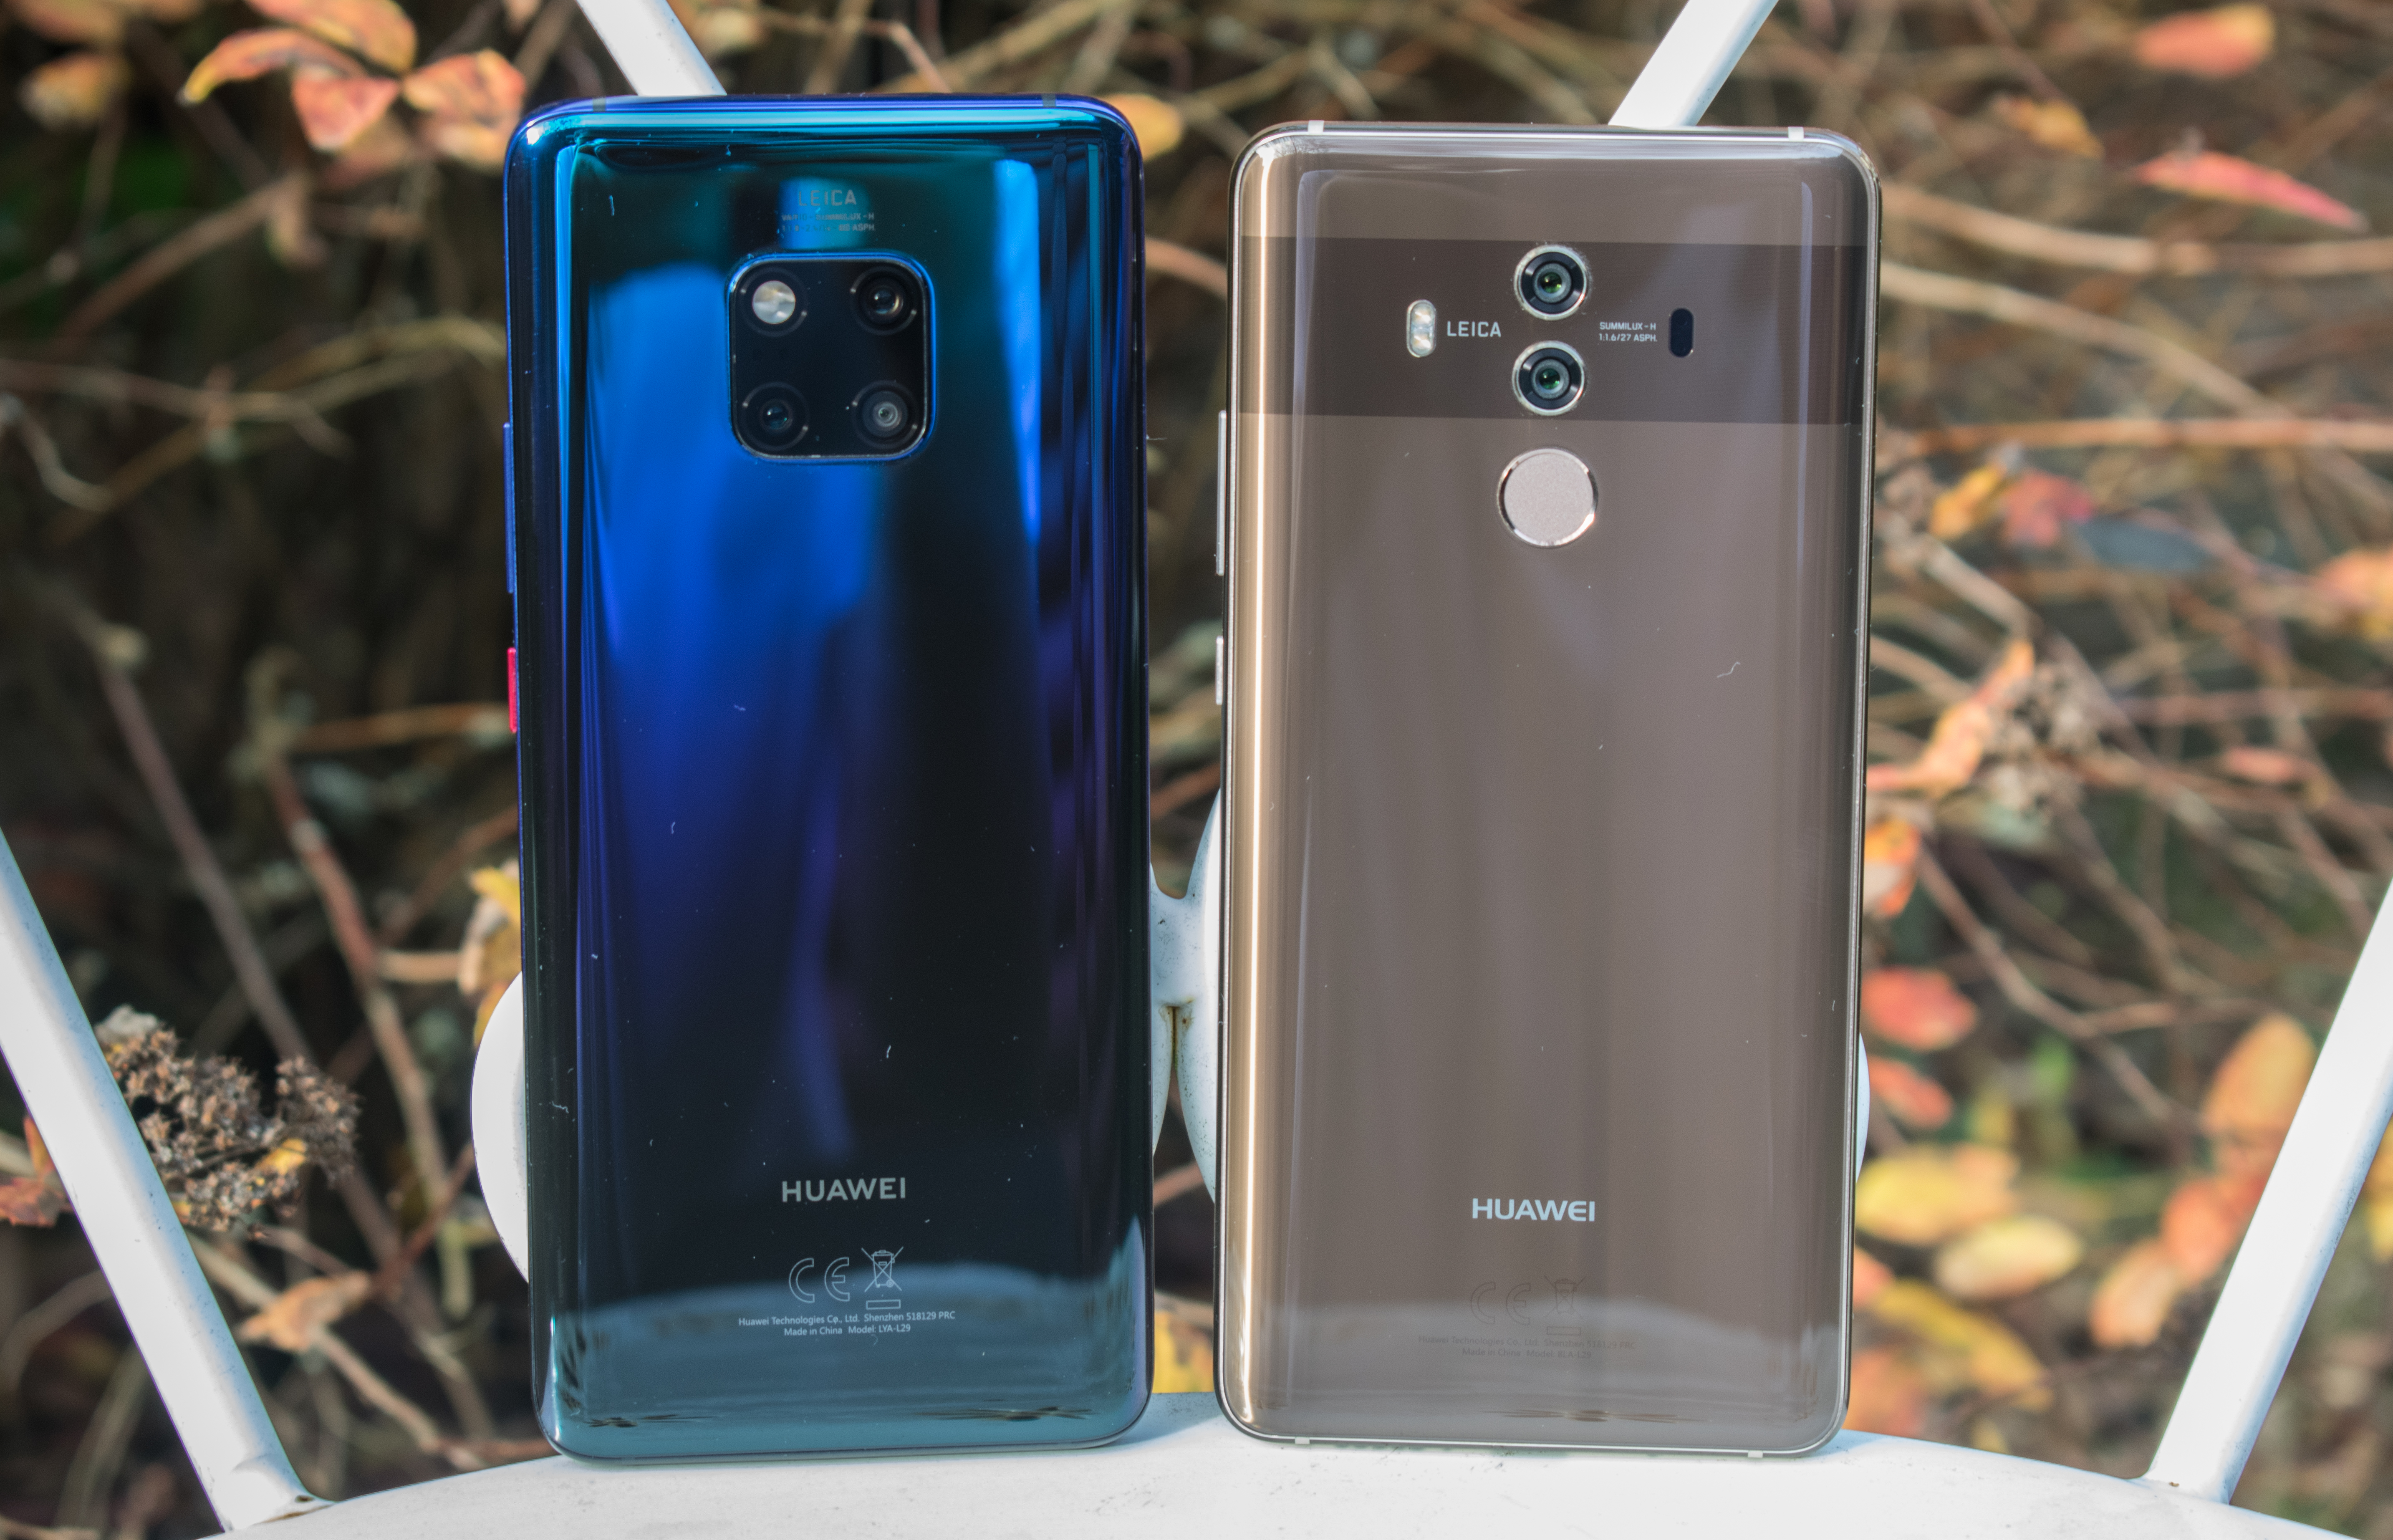 The Mate 20 & Kirin 980 Powering Two Contrasting Devices